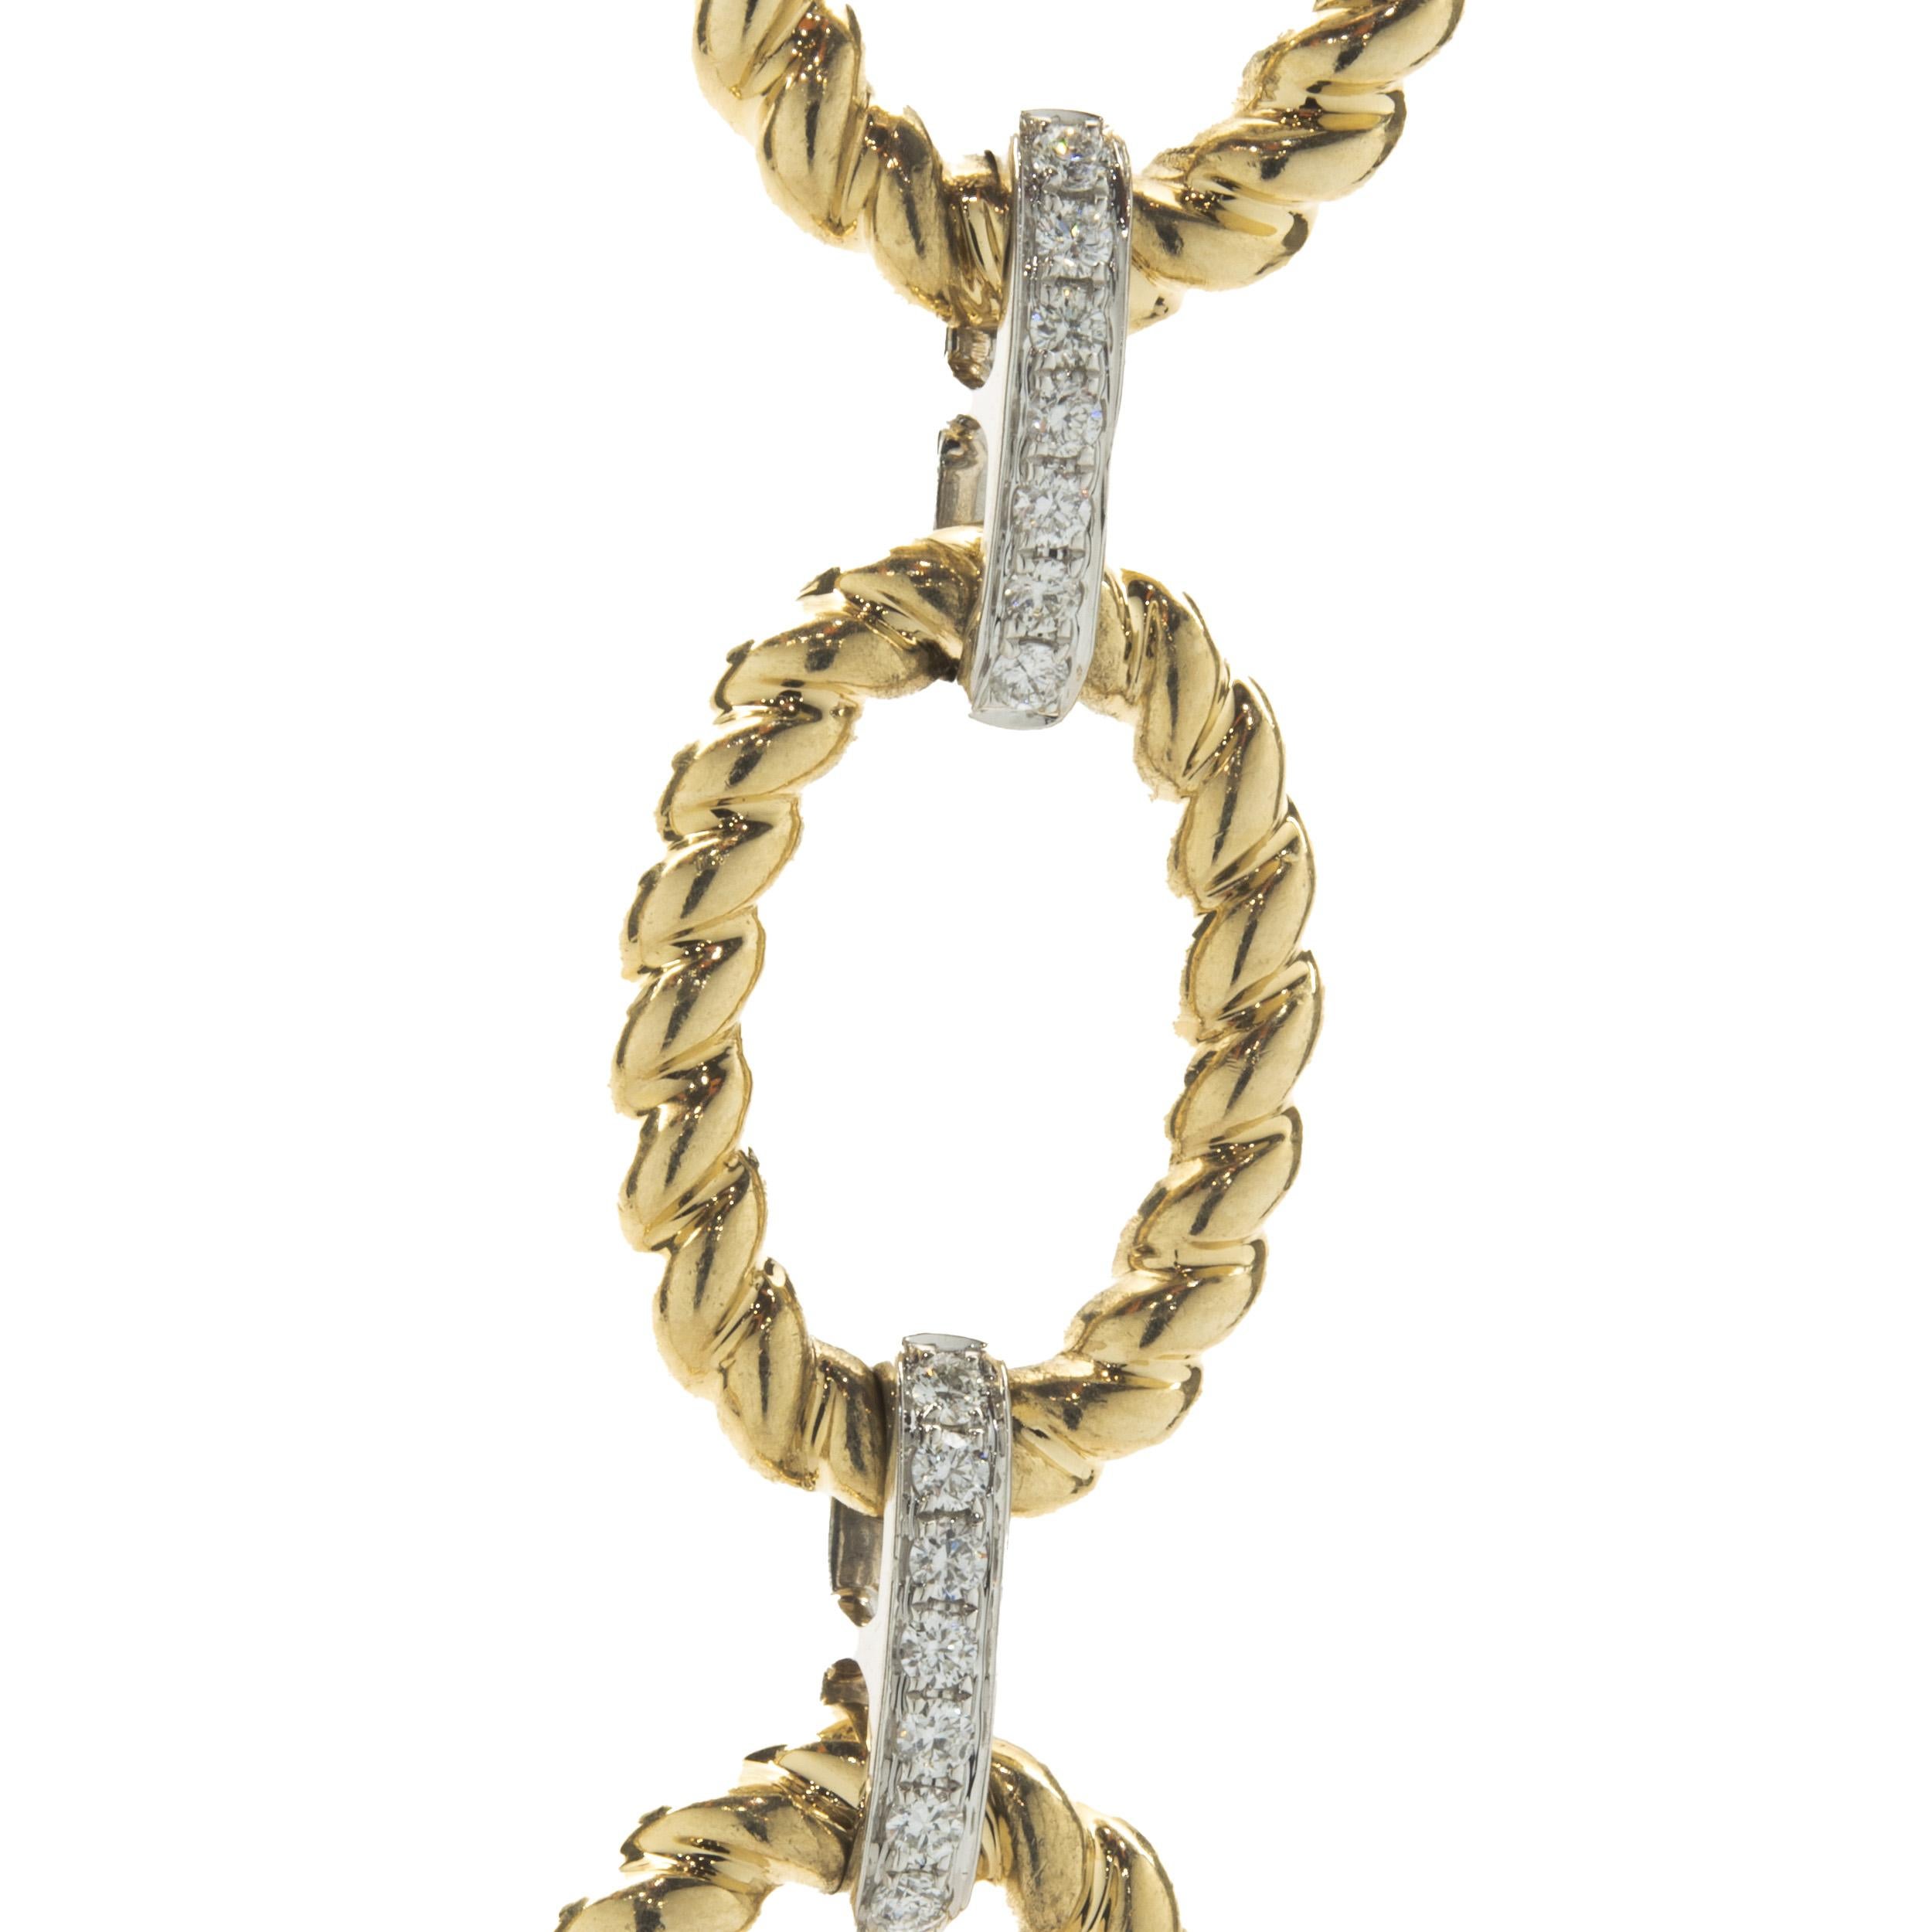 Designer: custom design
Material: 14K yellow & white gold
Diamond: 123 round brilliant cut = 1.49cttw
Color: G
Clarity: VS2
Dimensions: necklace measures 18-inches in length 
Weight: 52.17 grams
